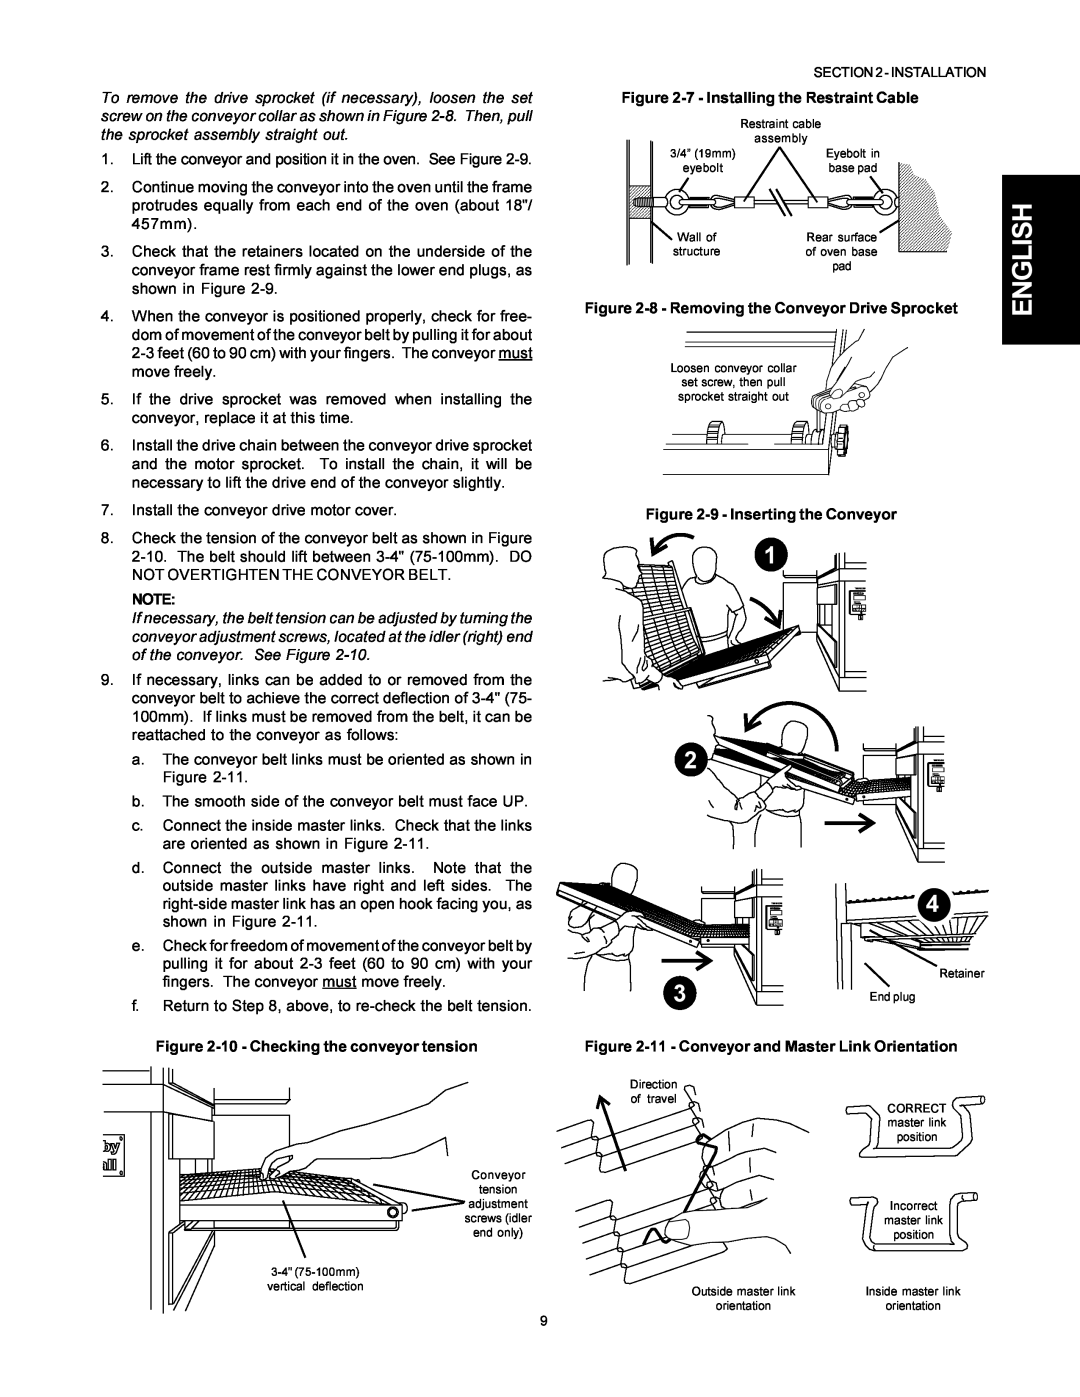 Middleby Marshall PS500 installation manual English, 10 - Checking the conveyor tension, 7 - Installing the Restraint Cable 